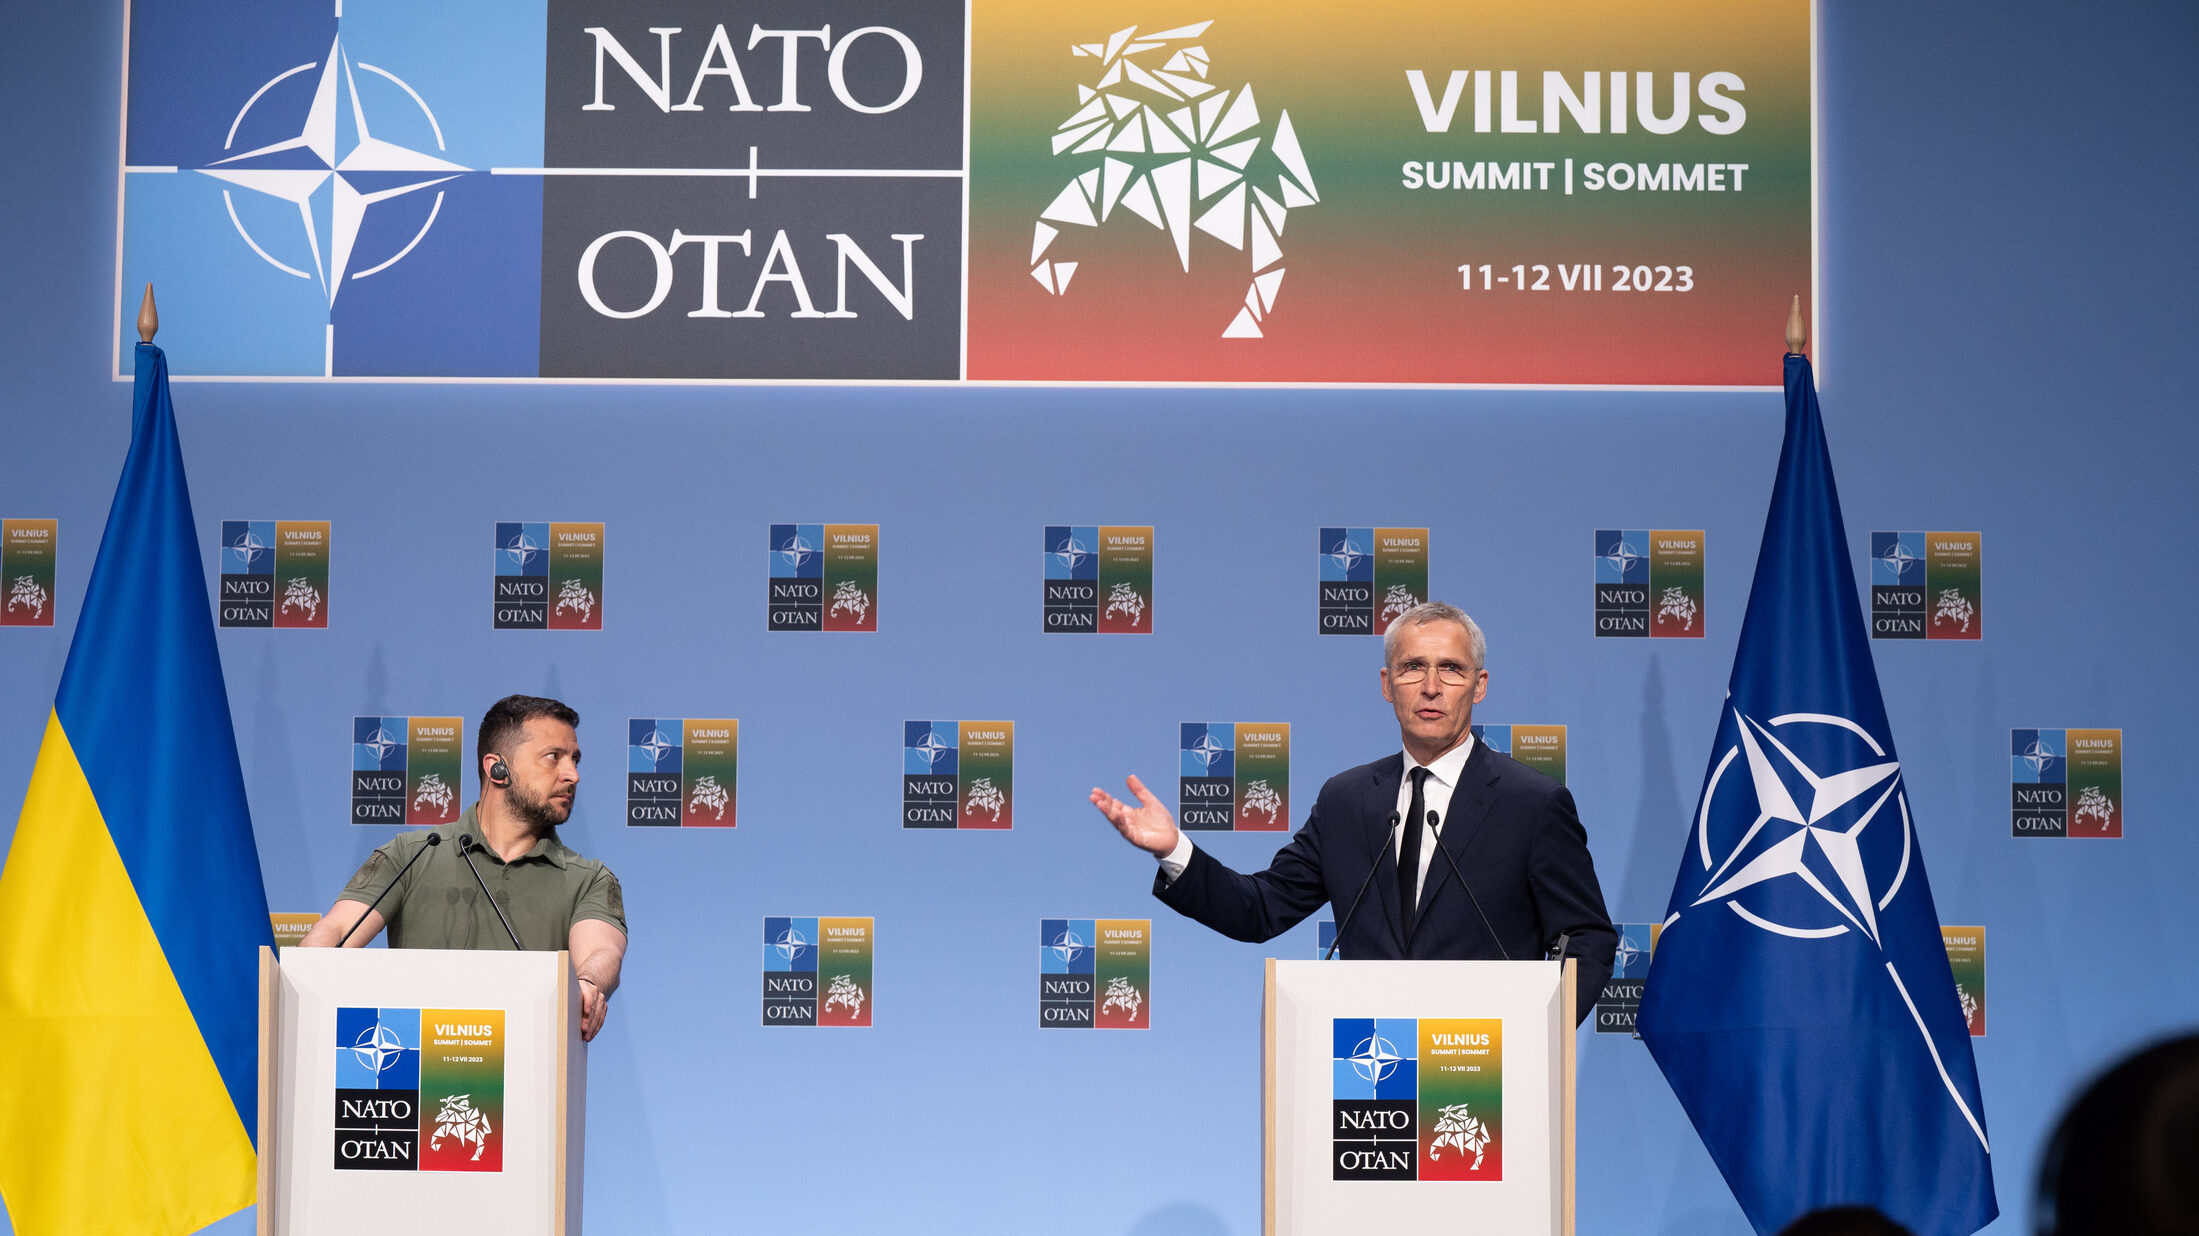 At NATO summit, Zelenskyy disappointed but finds solace in G7 pledge, seeks long-range US weapons